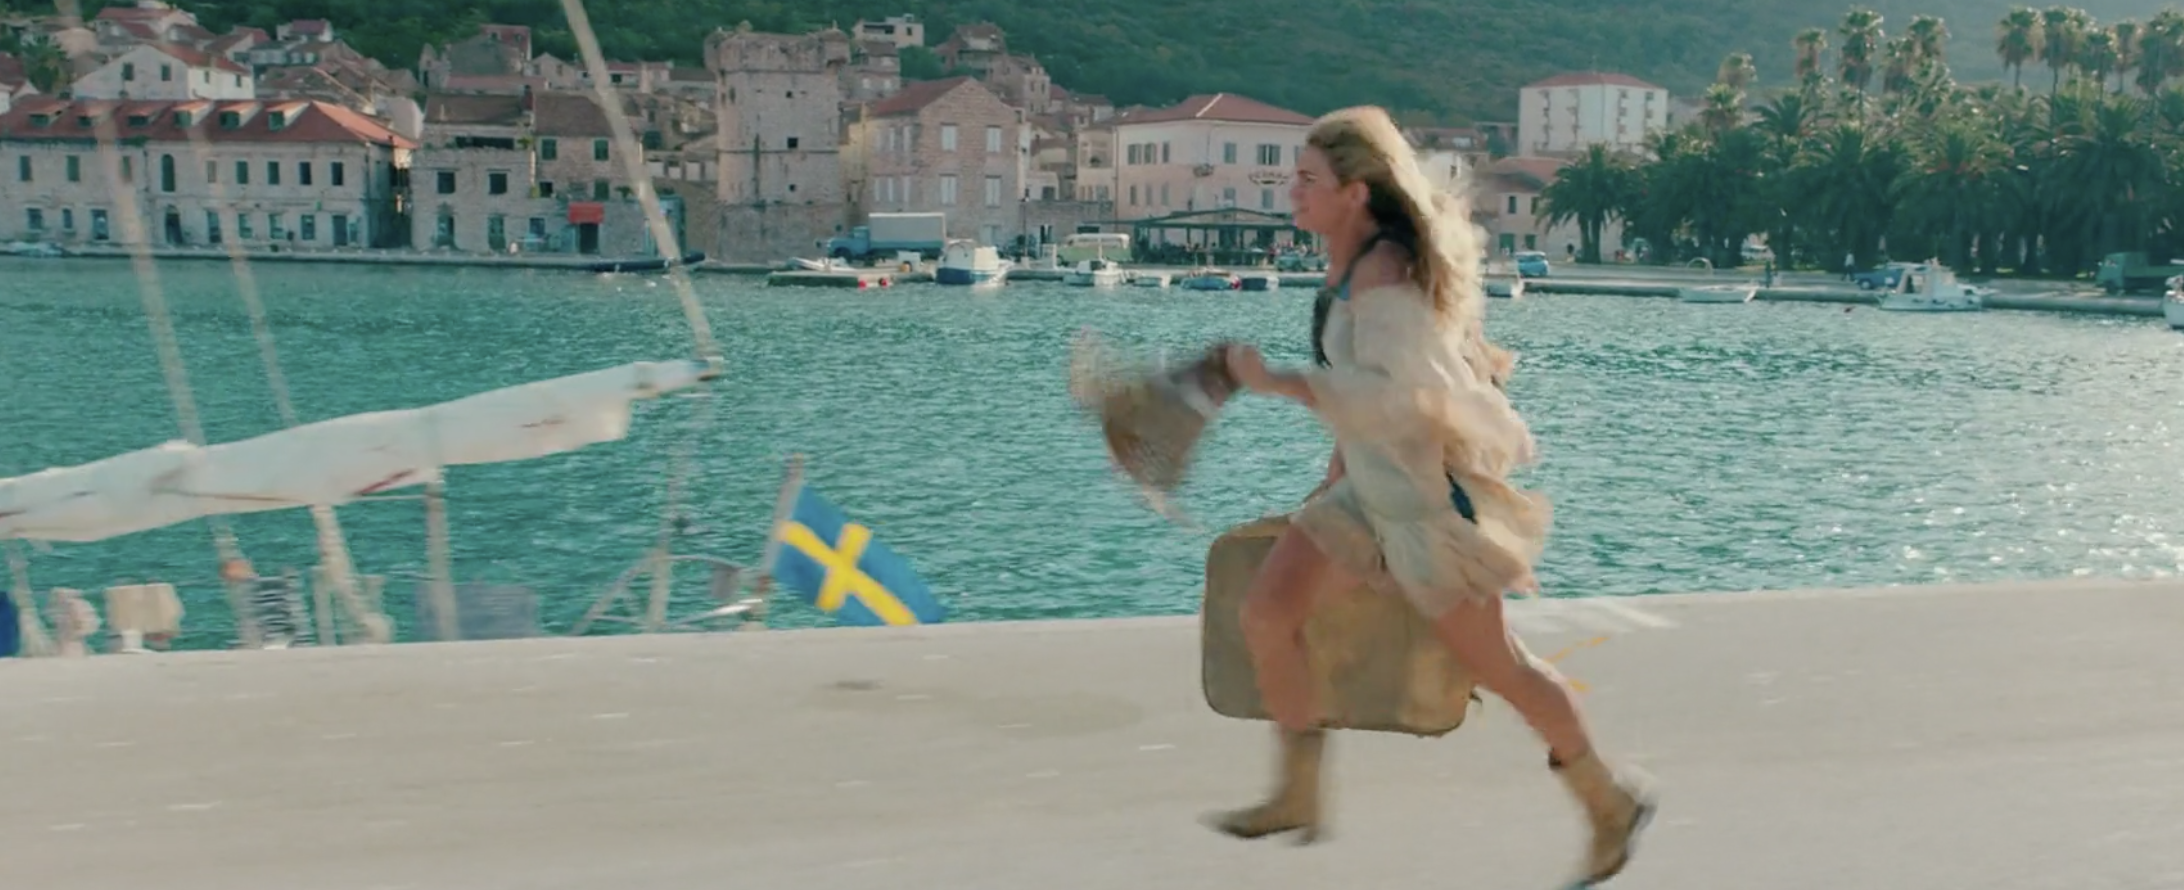 Image belongs to Universal Pictures. Young Donna running on the port used in Mamma Mia II